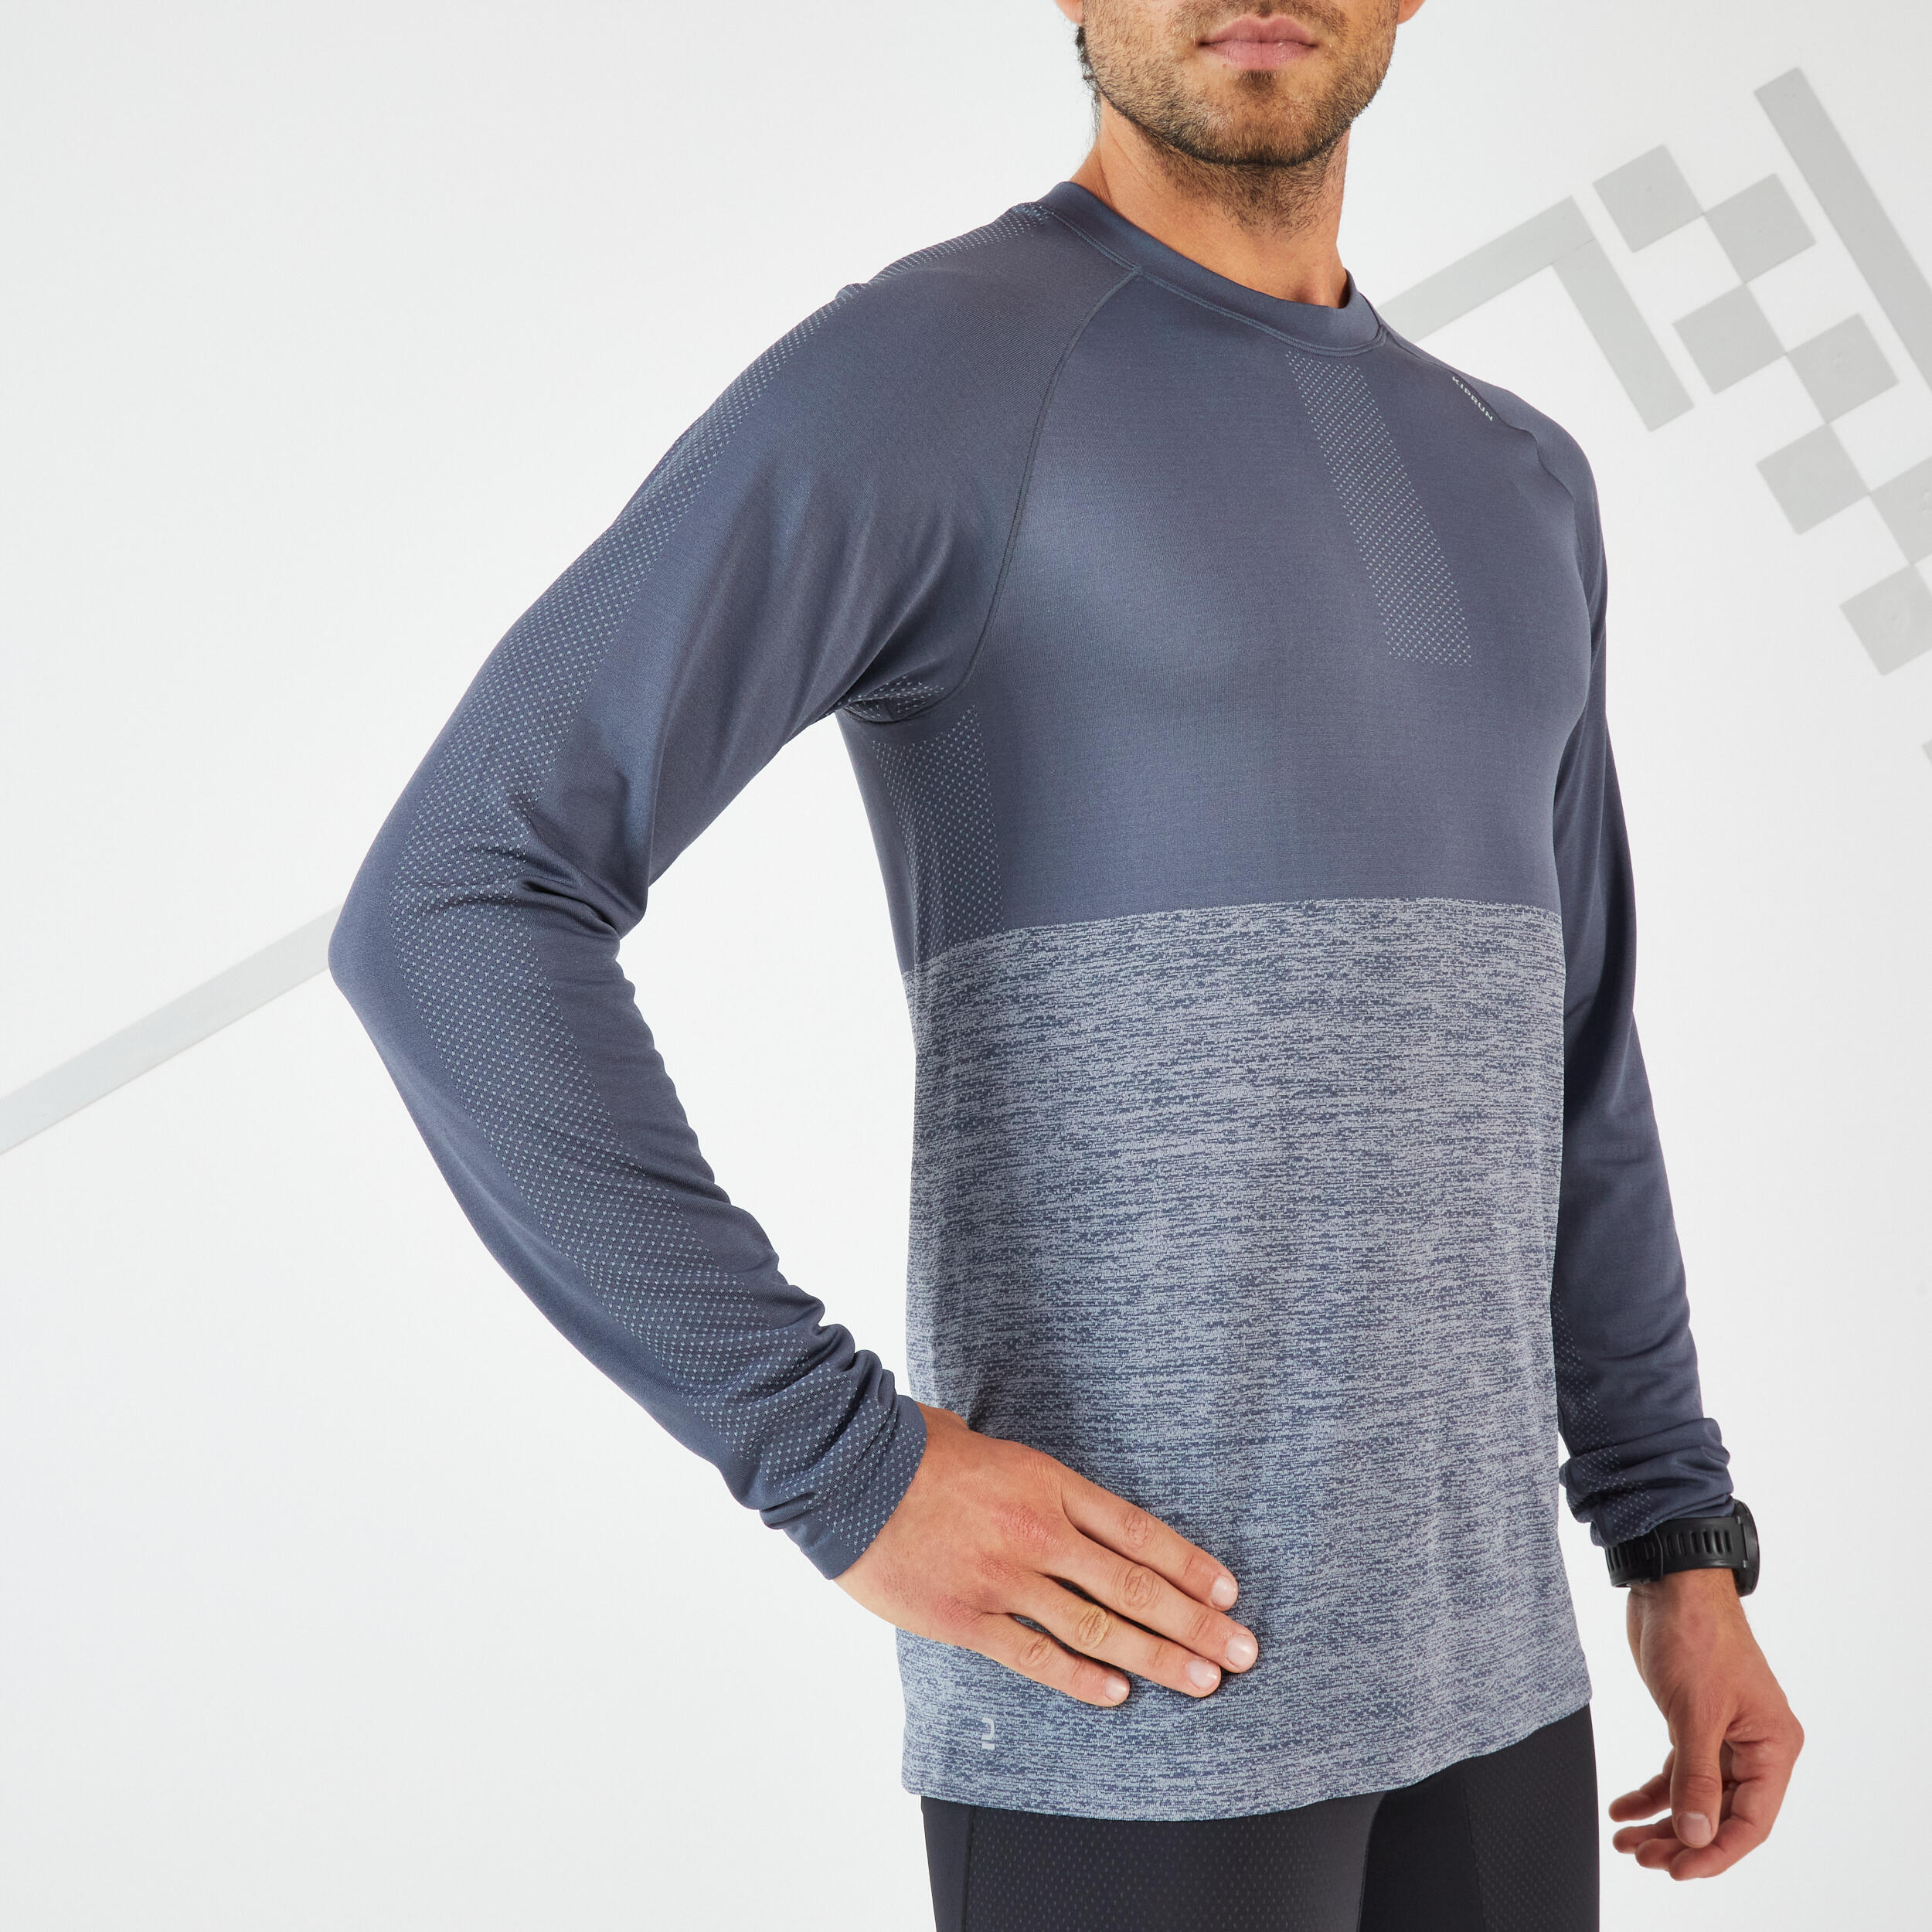 CARE MEN'S BREATHABLE LONG-SLEEVED RUNNING T-SHIRT - GREY LIMITED EDITION 6/9